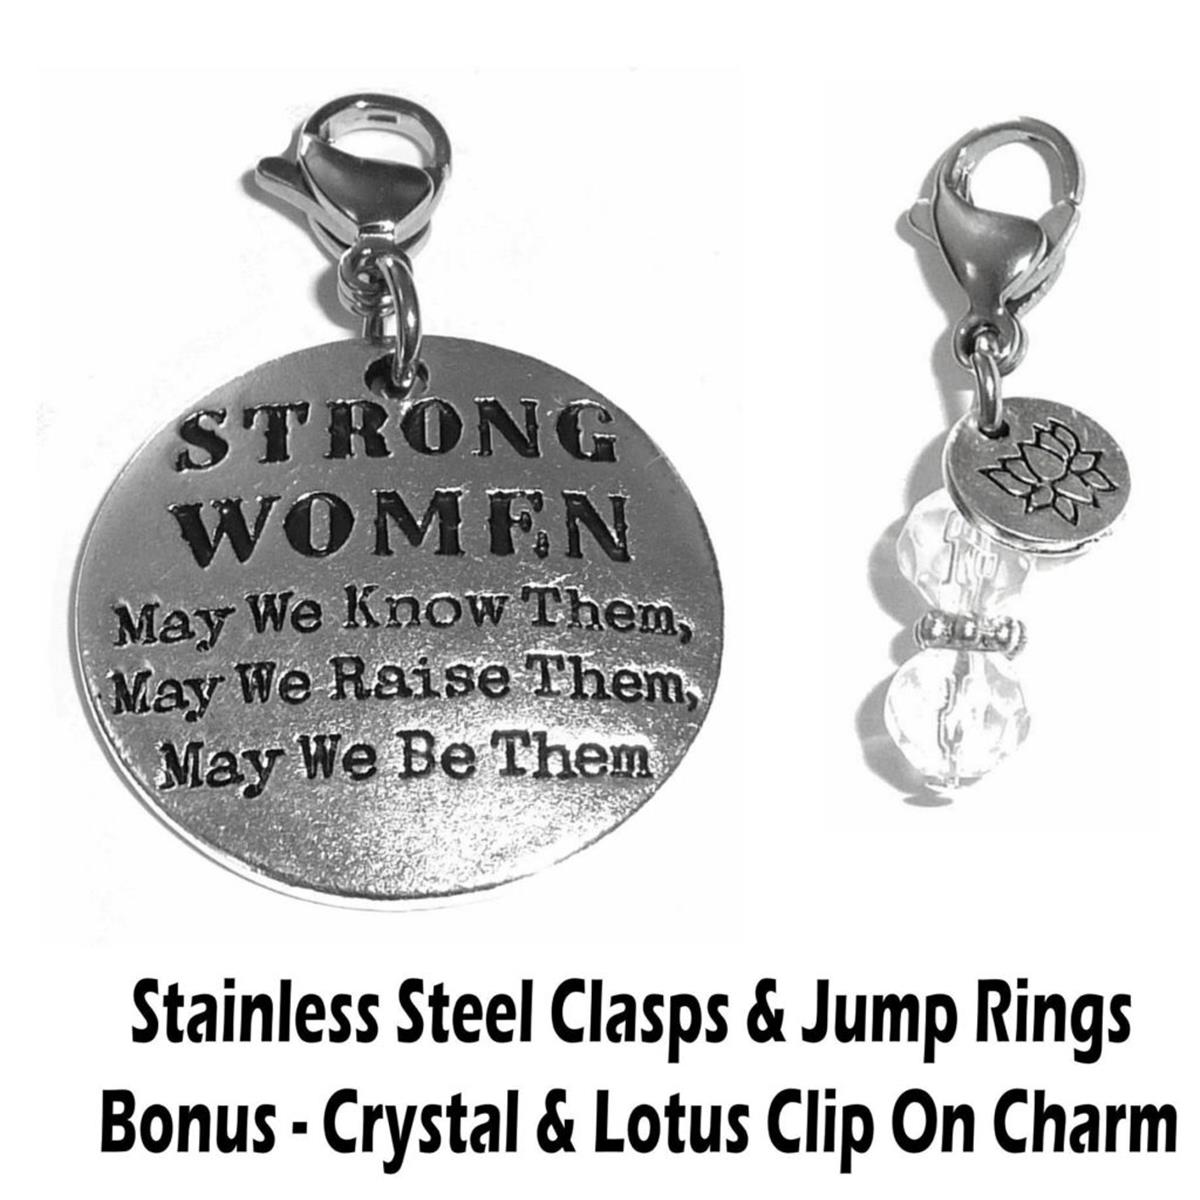 Strong Women Clip On Charms - Inspirational Charms Clip On Anywhere